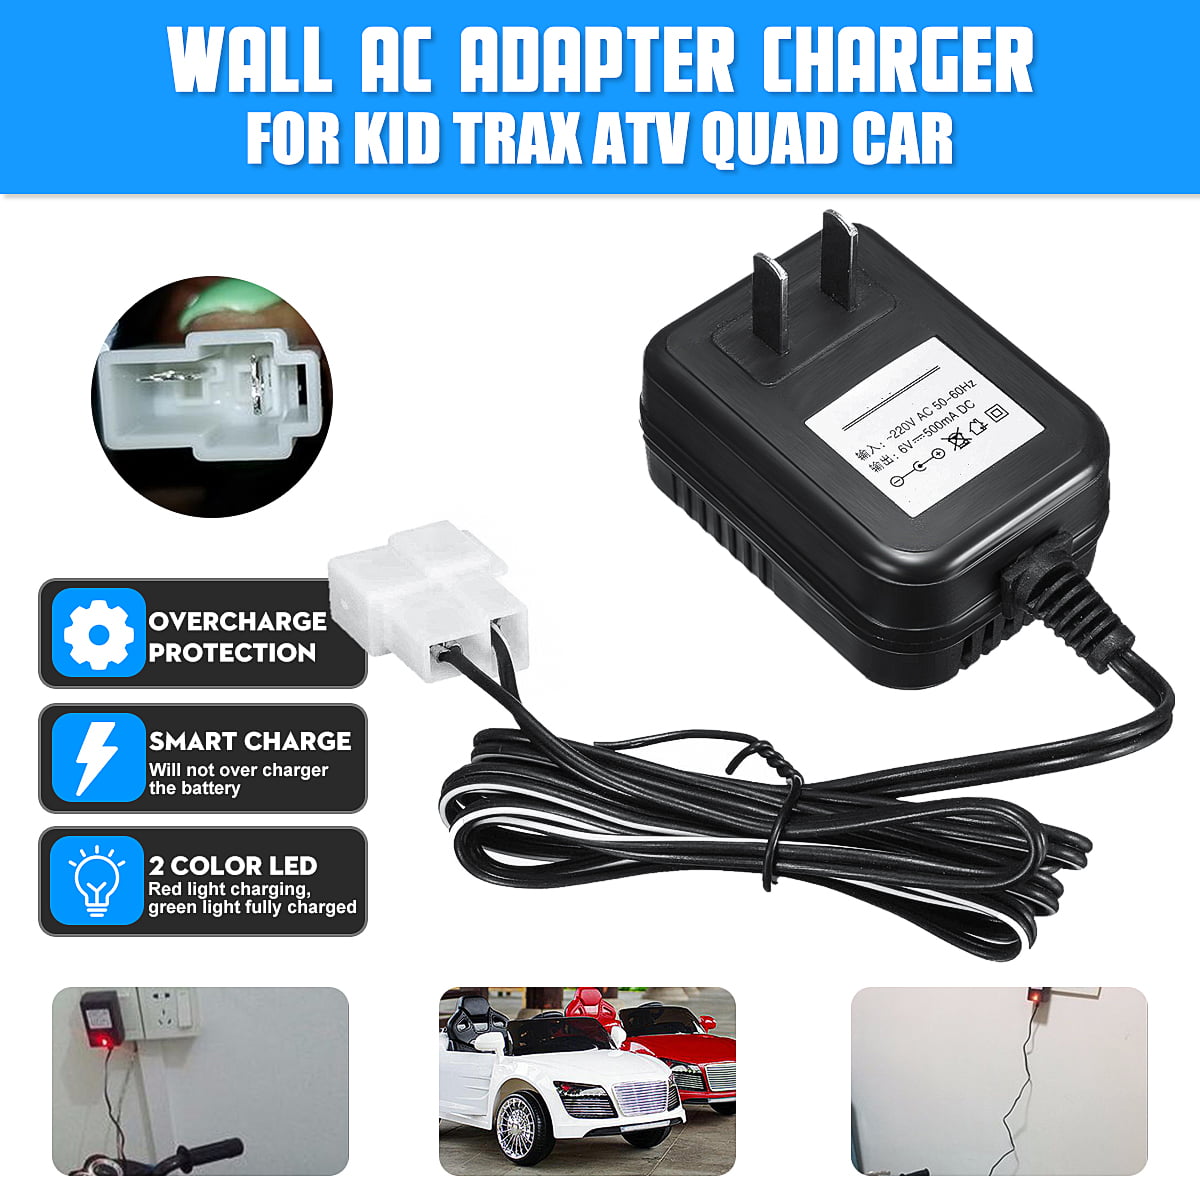 Power DC charger AC adapter for KID TRAX MOTO Disney QUAD 6V battery ride on car 